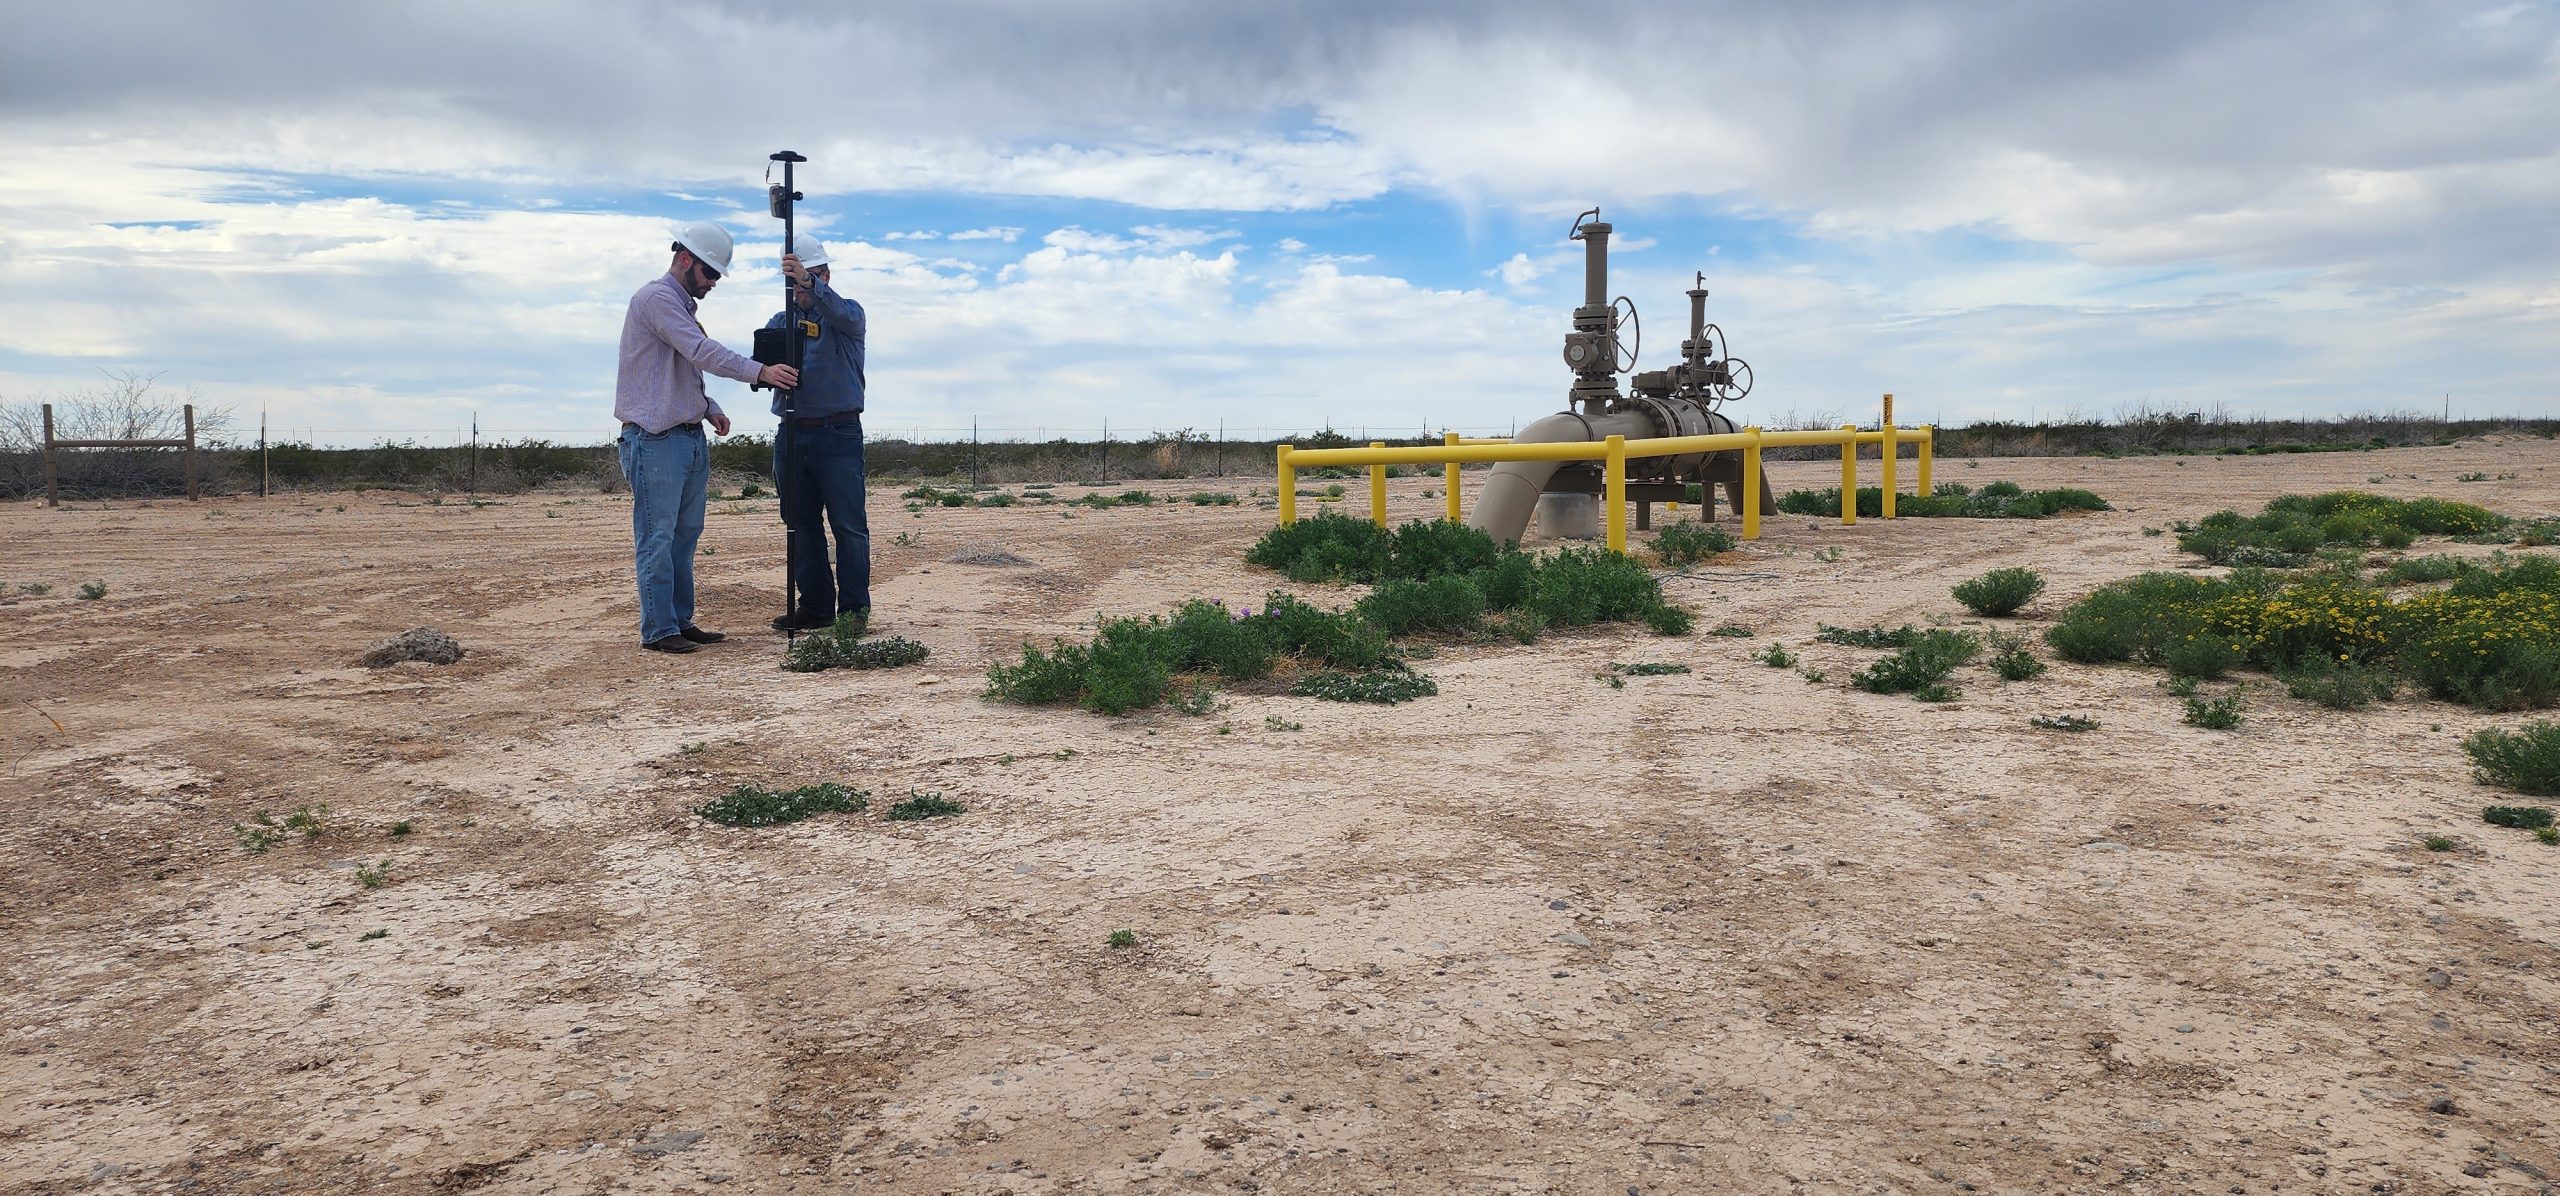 Kinetik uses the Arrow Gold GNSS receiver with ArcGIS Field Maps to map high-accuracy pipeline assets